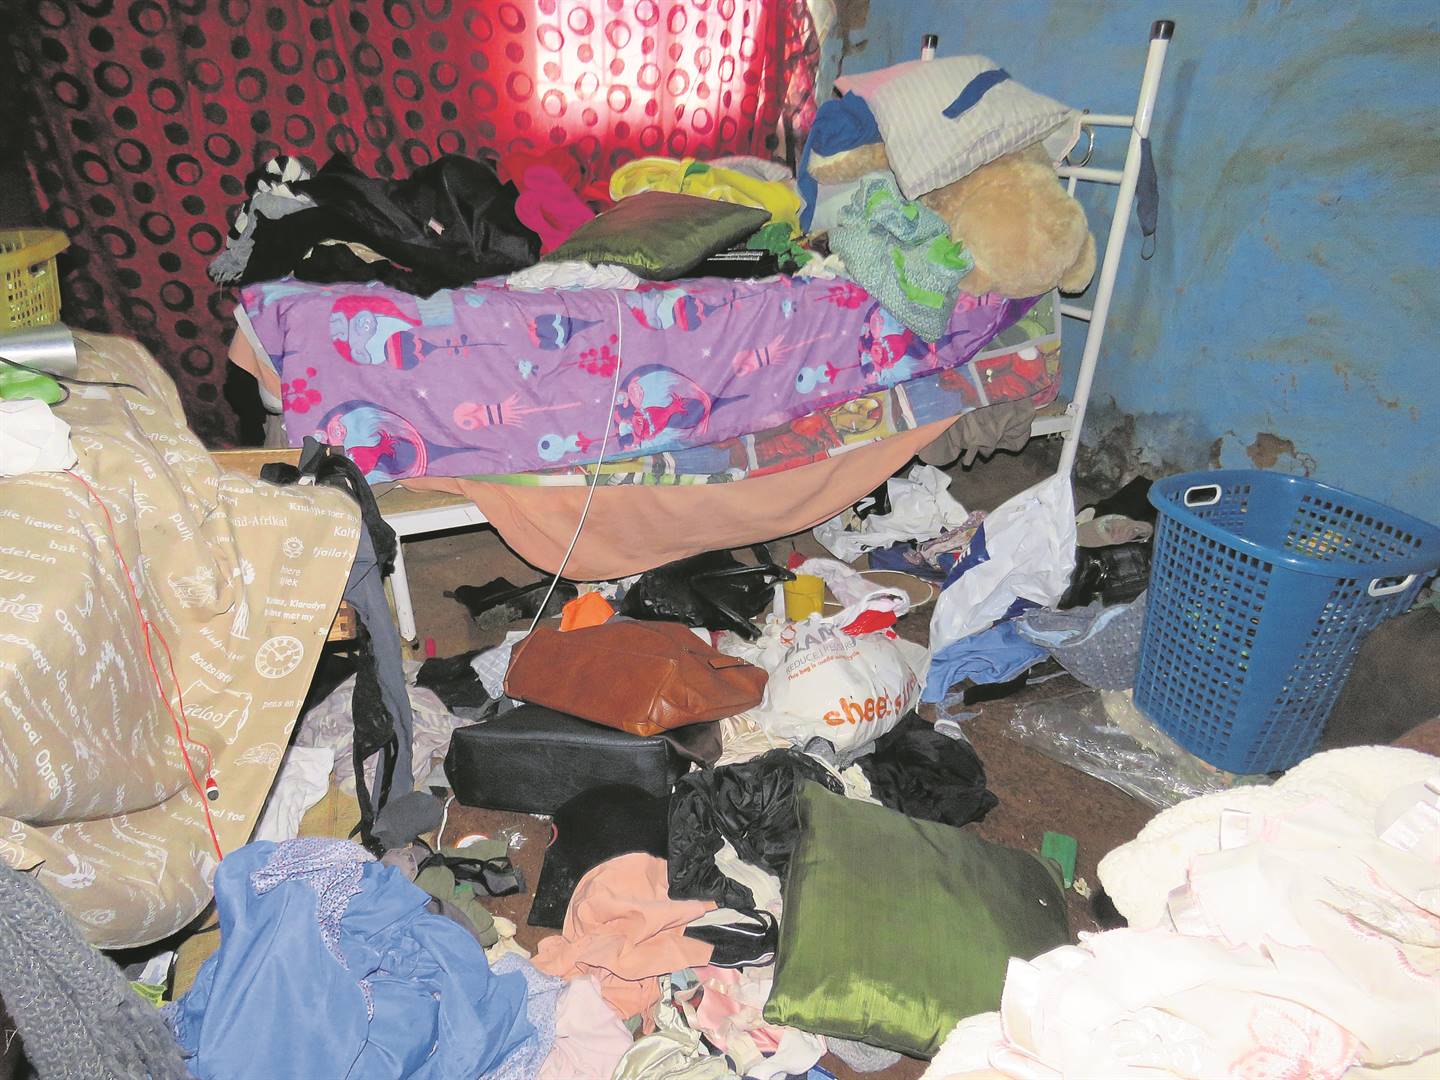 Robbers told a woman to cover herself in blankets as they ransacked her house for valuables.    Photo by        Ntebatse Masipa